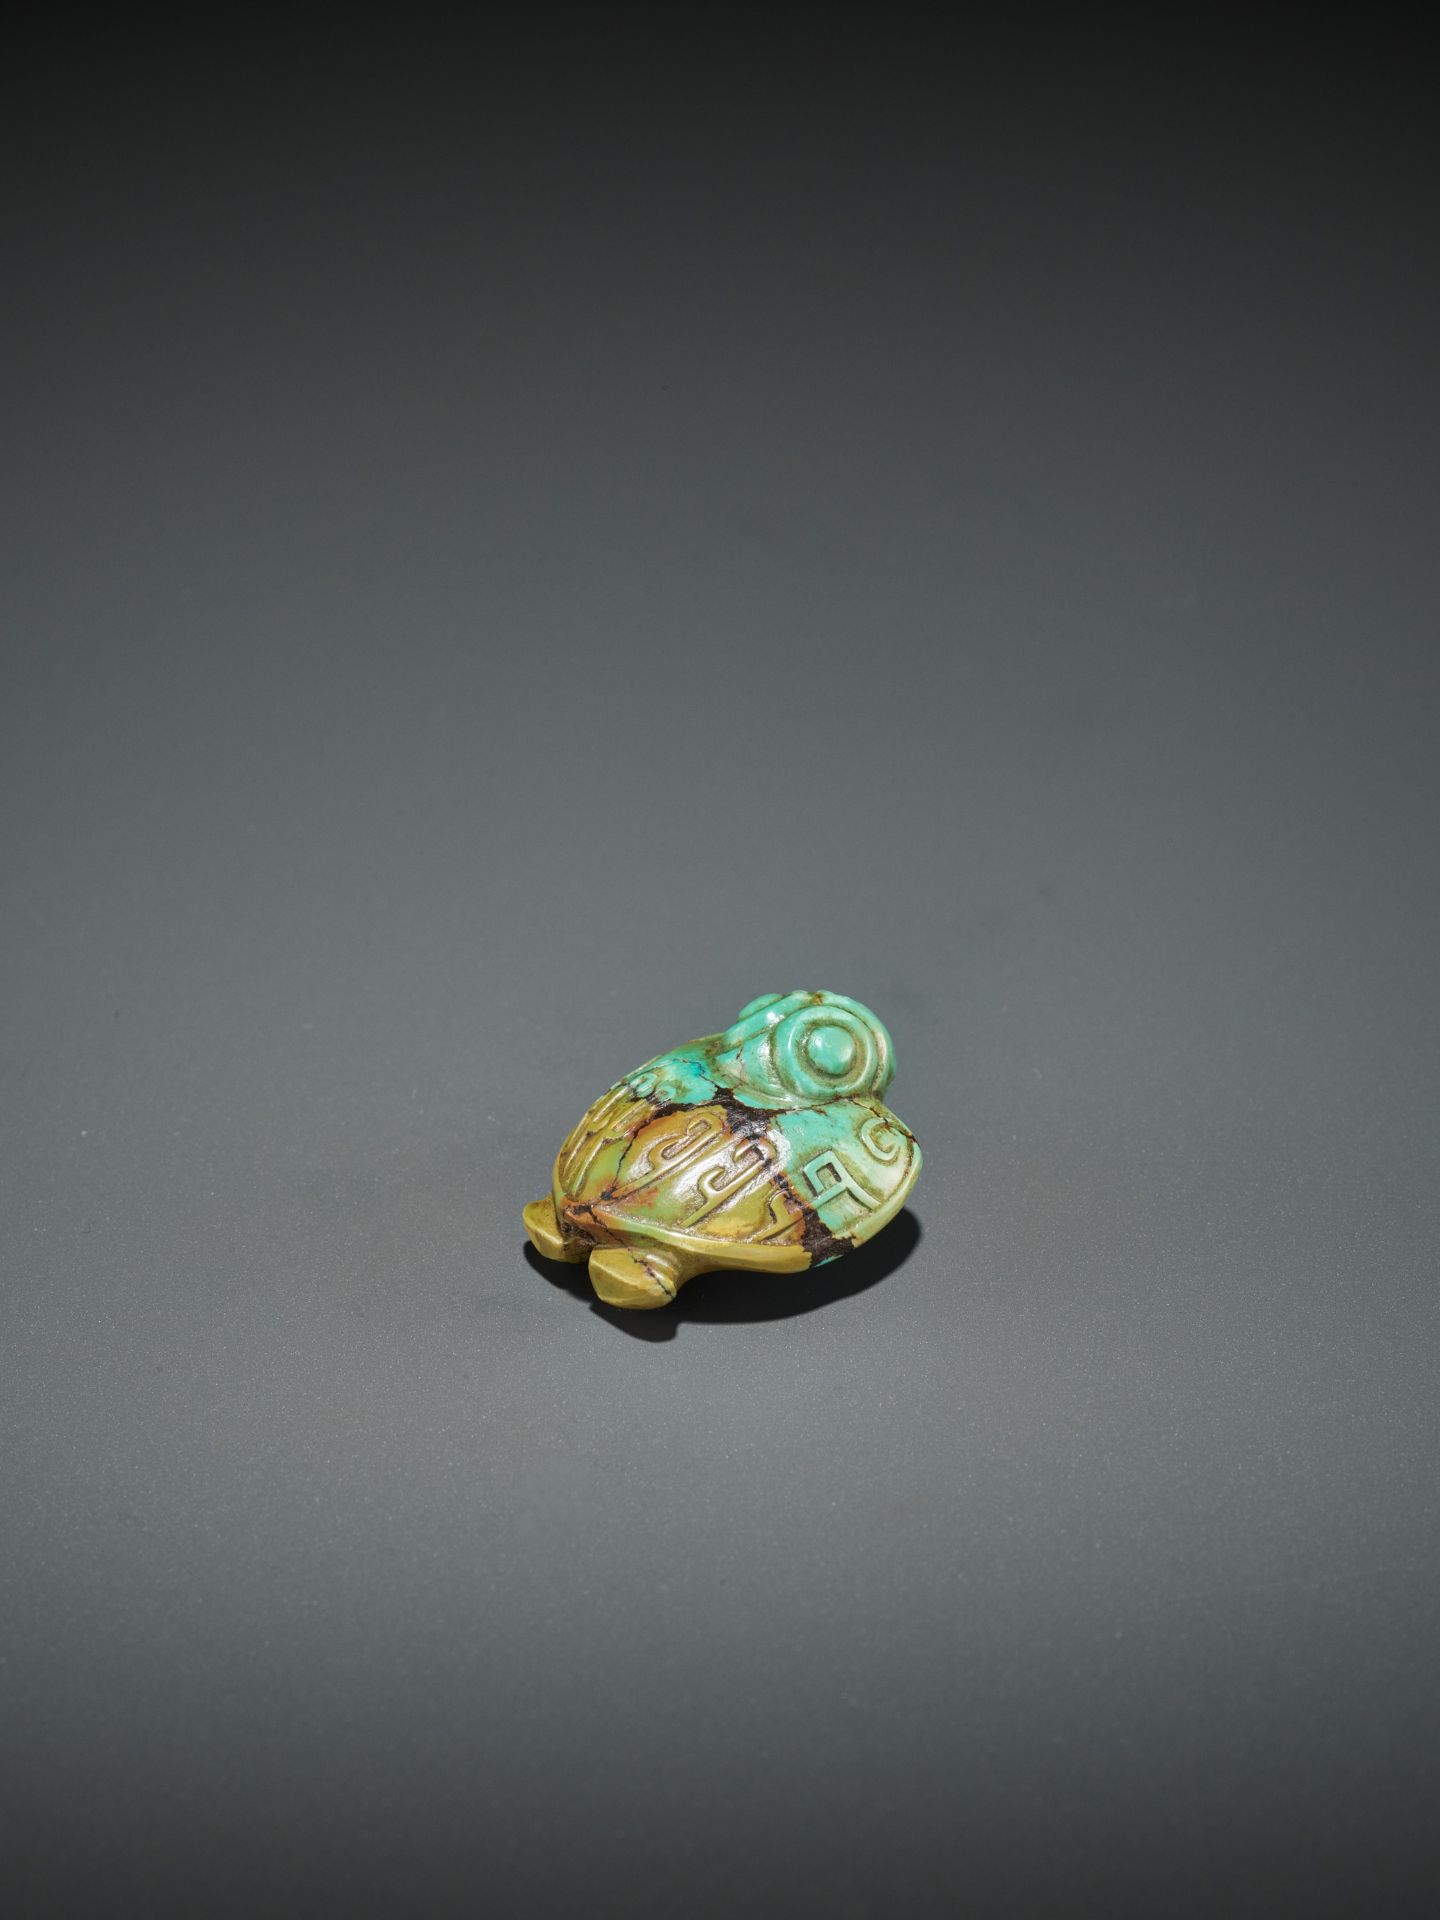 A TURQUOISE PENDANT DEPICTING A BIRD, SHANG TO WESTERN ZHOU DYNASTY - Image 9 of 12